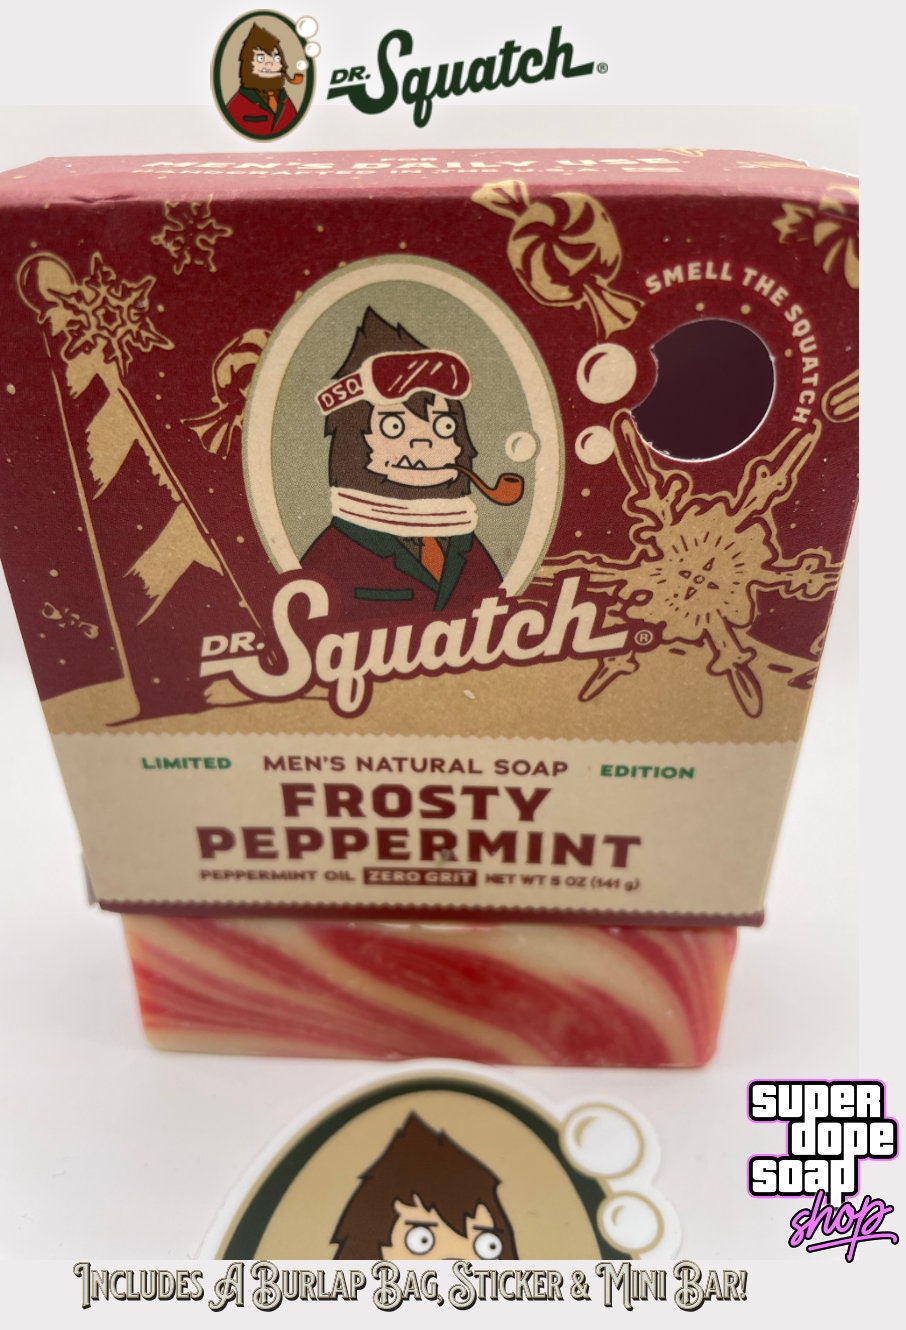 Me and Dr. Squatch Soap by FTGenikit on DeviantArt